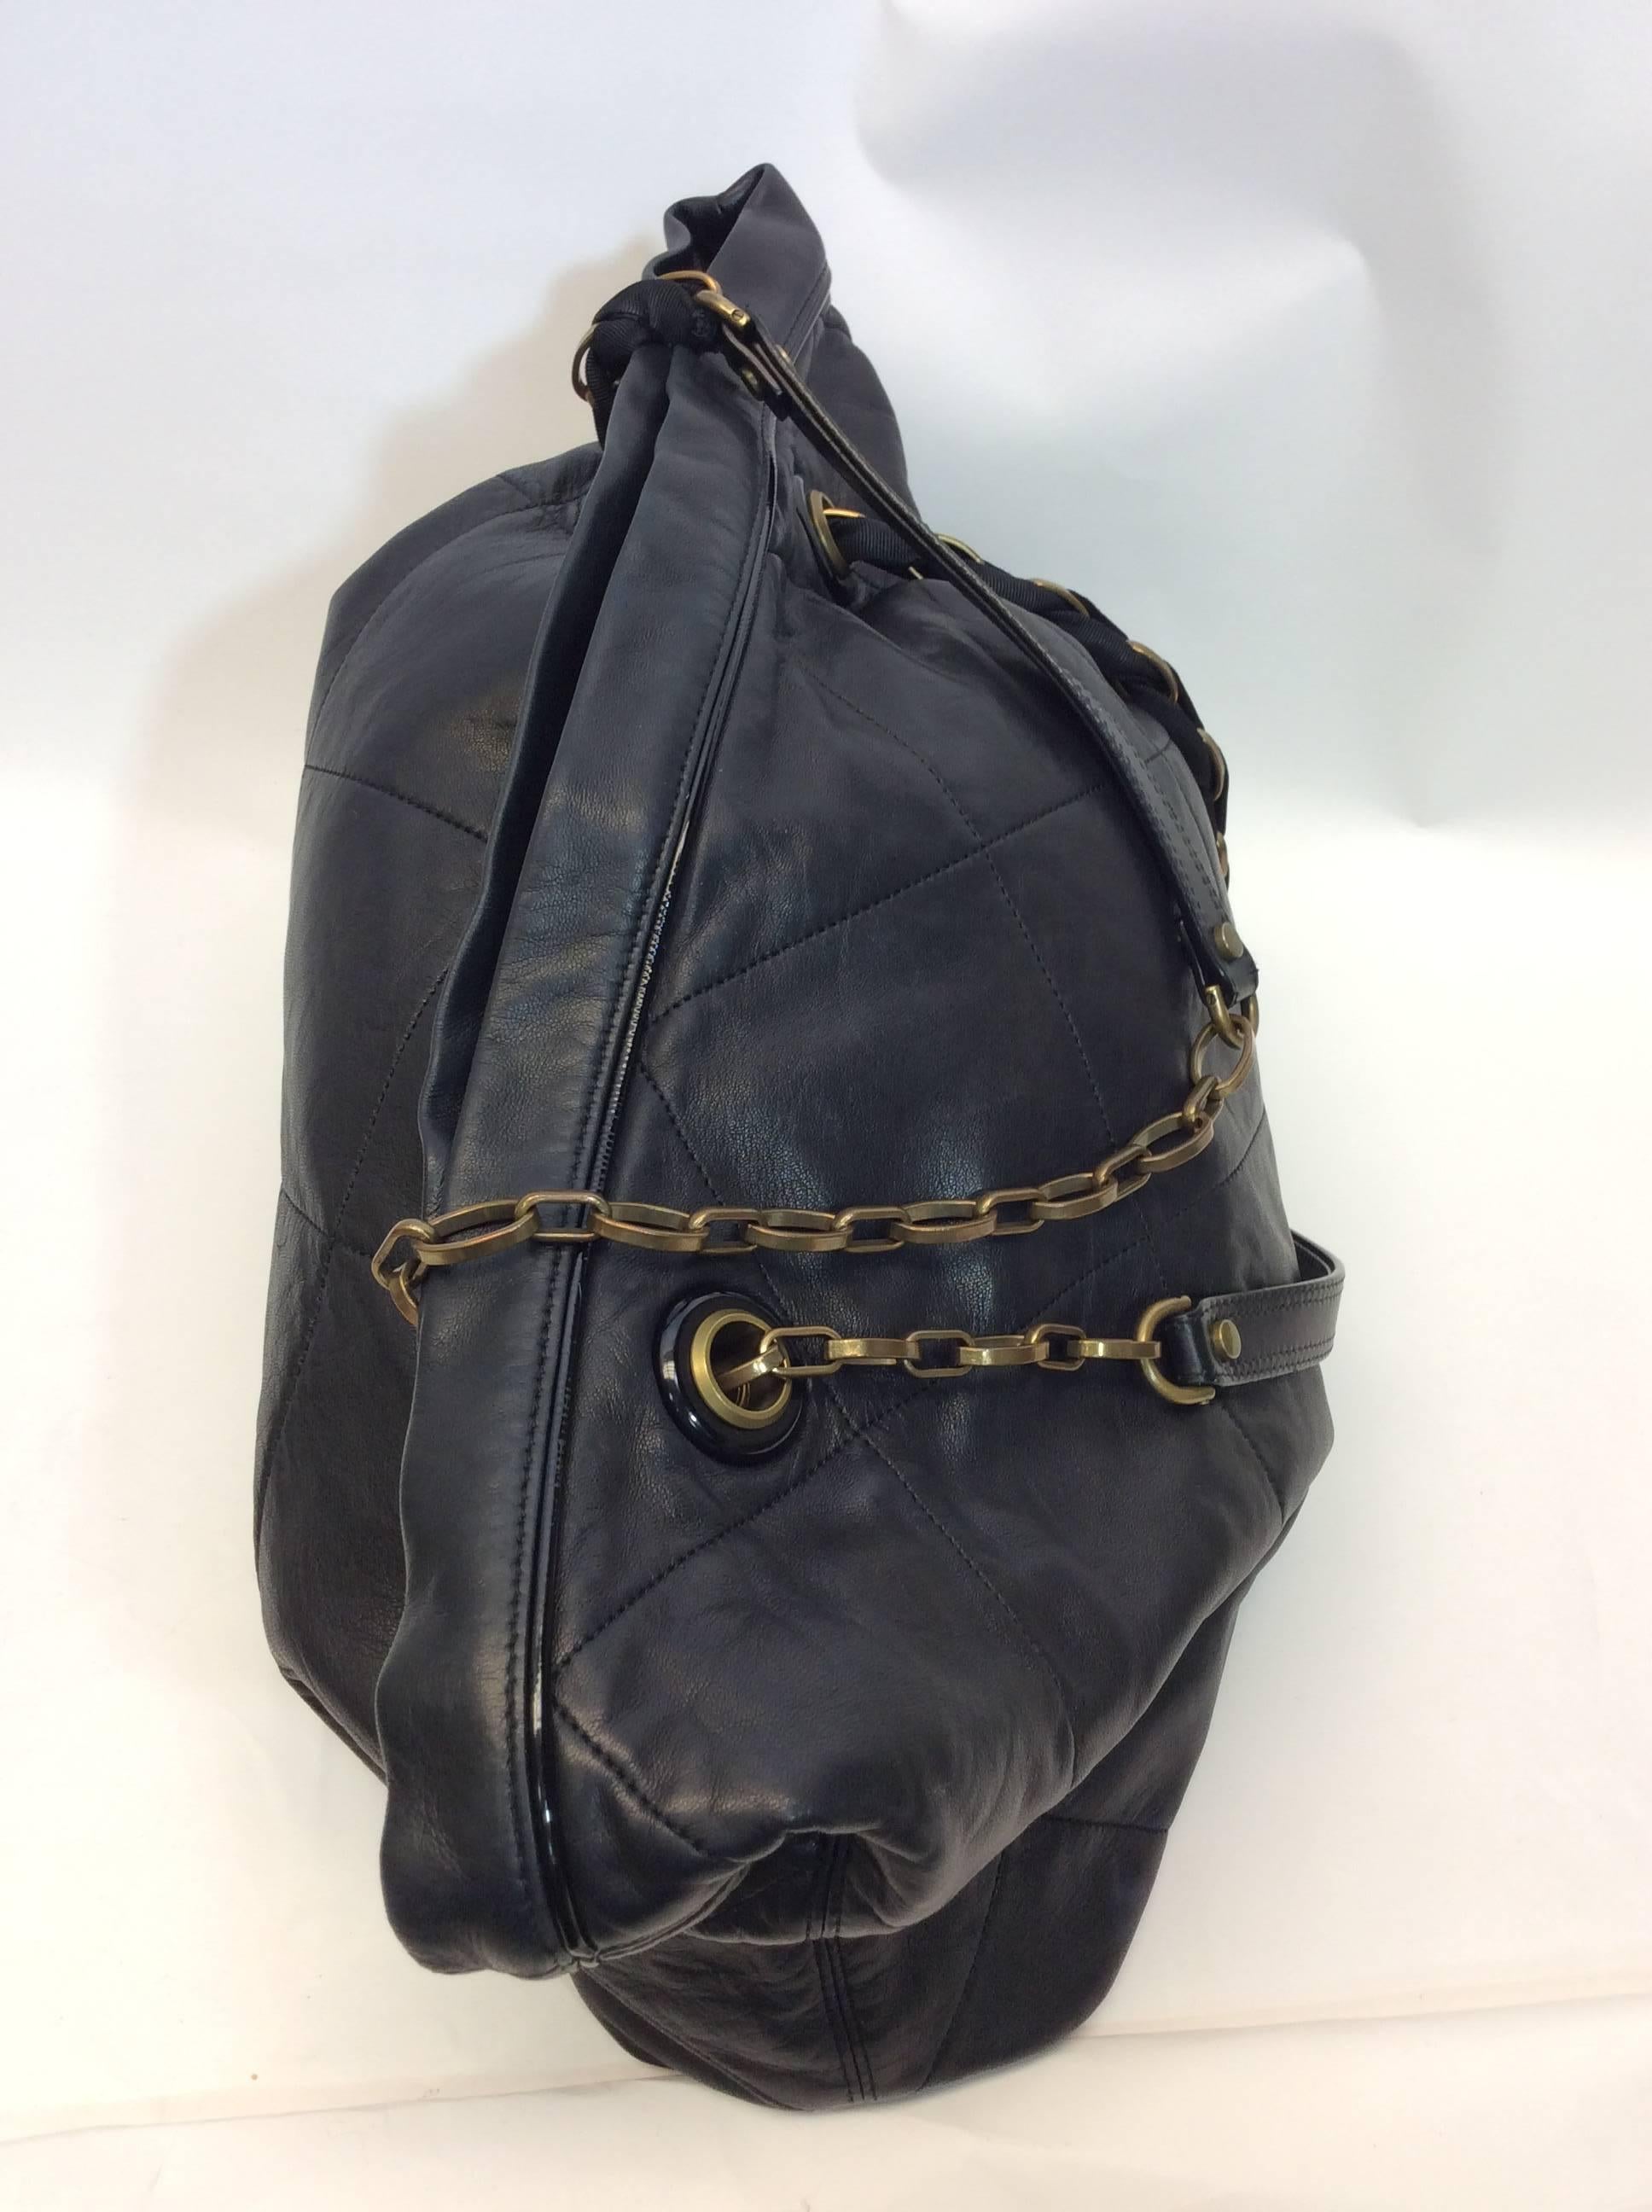 Lanvin Quilted Leather Large Chain Link Purse In Excellent Condition For Sale In Narberth, PA